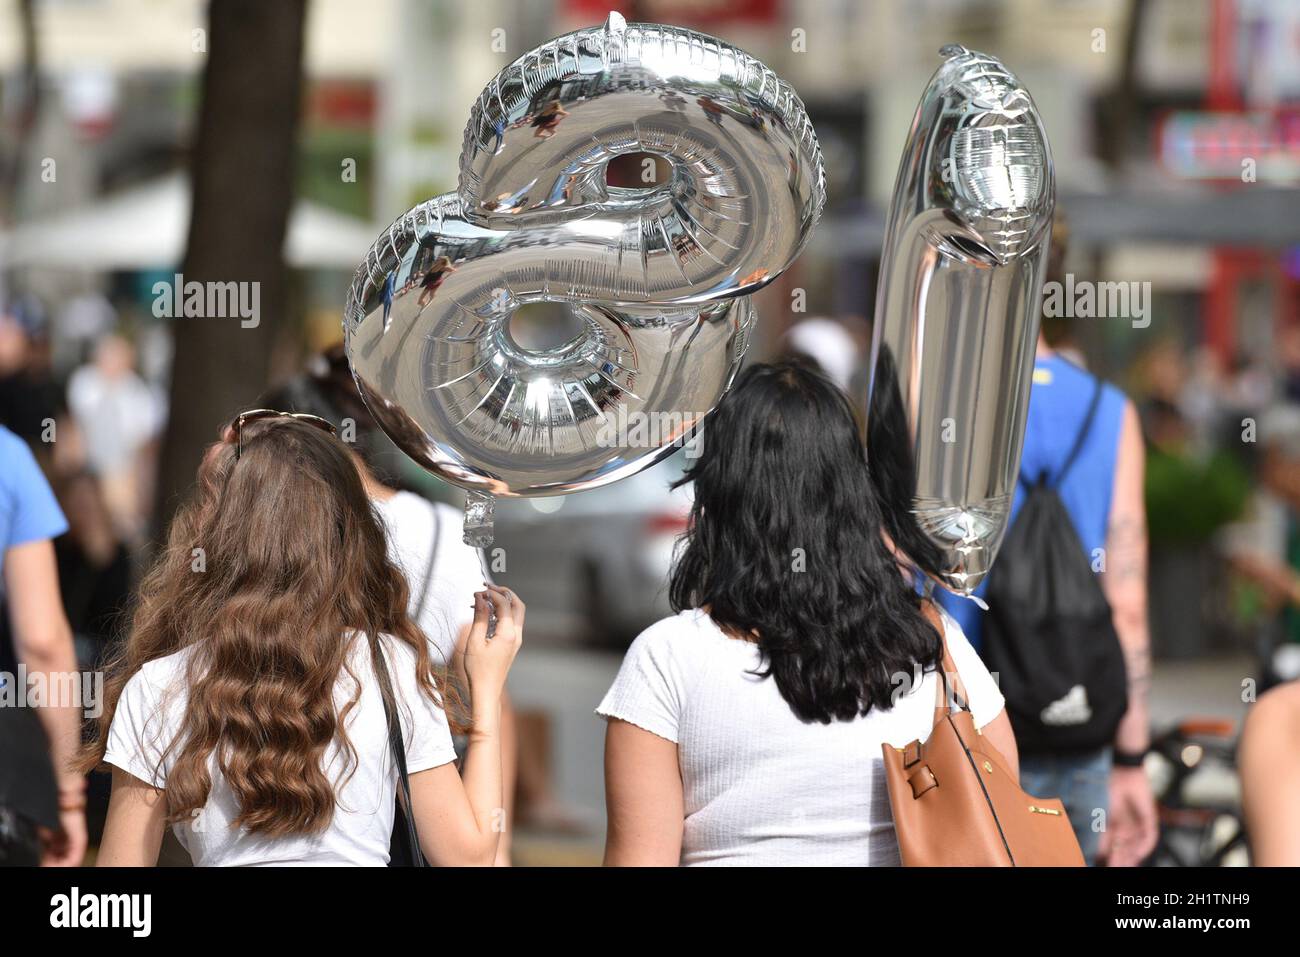 Zwei Mädchen mit Silber-Luftballons '18' - Two girls with silver number balloons '18' Stock Photo